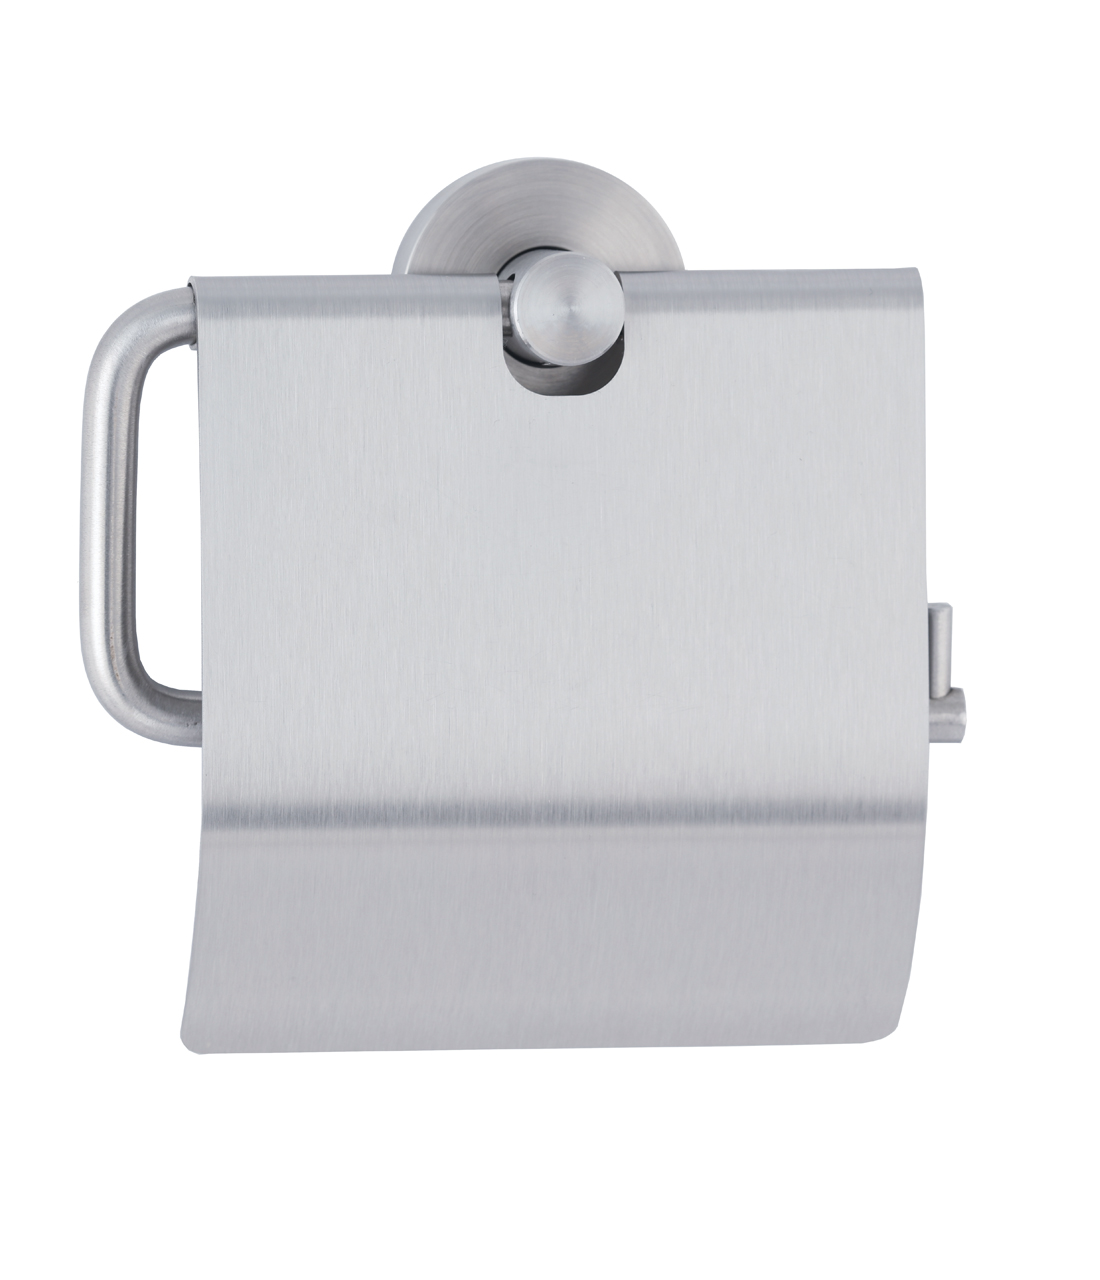 Bobrick B-541 Spare Toilet Roll Holder with Satin Finish